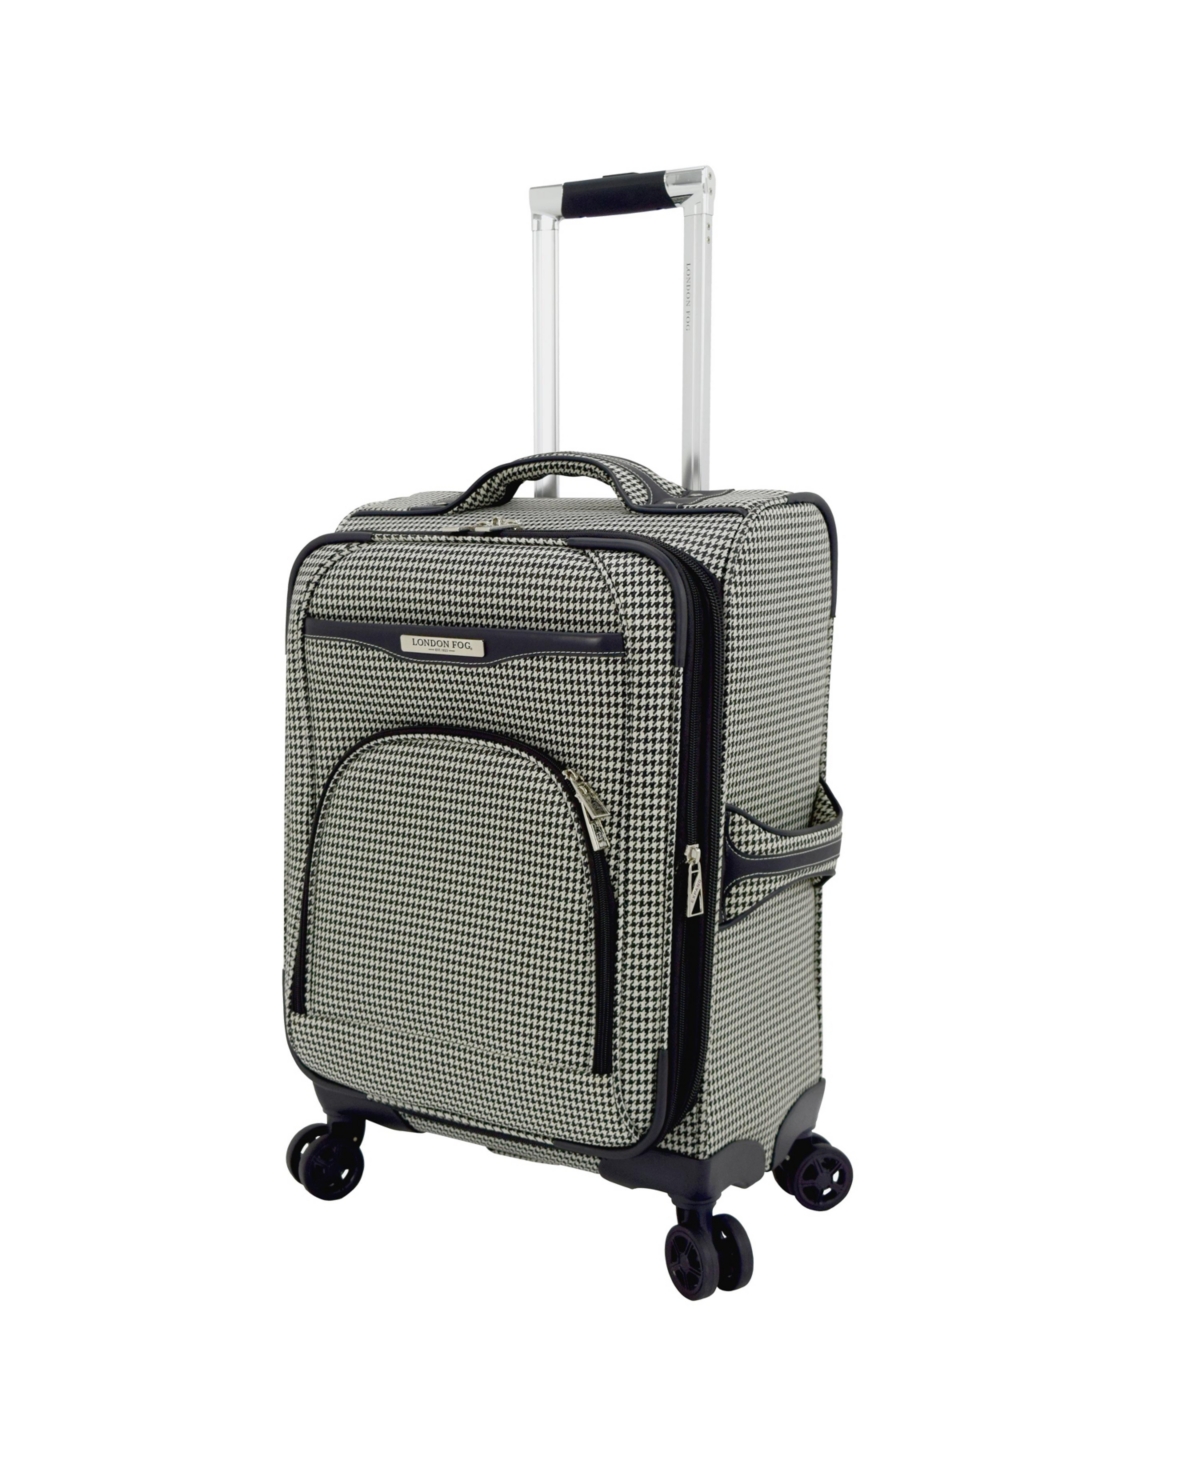 Oxford Iii 20" Expandable Spinner Carry-On - Olive Houndstooth